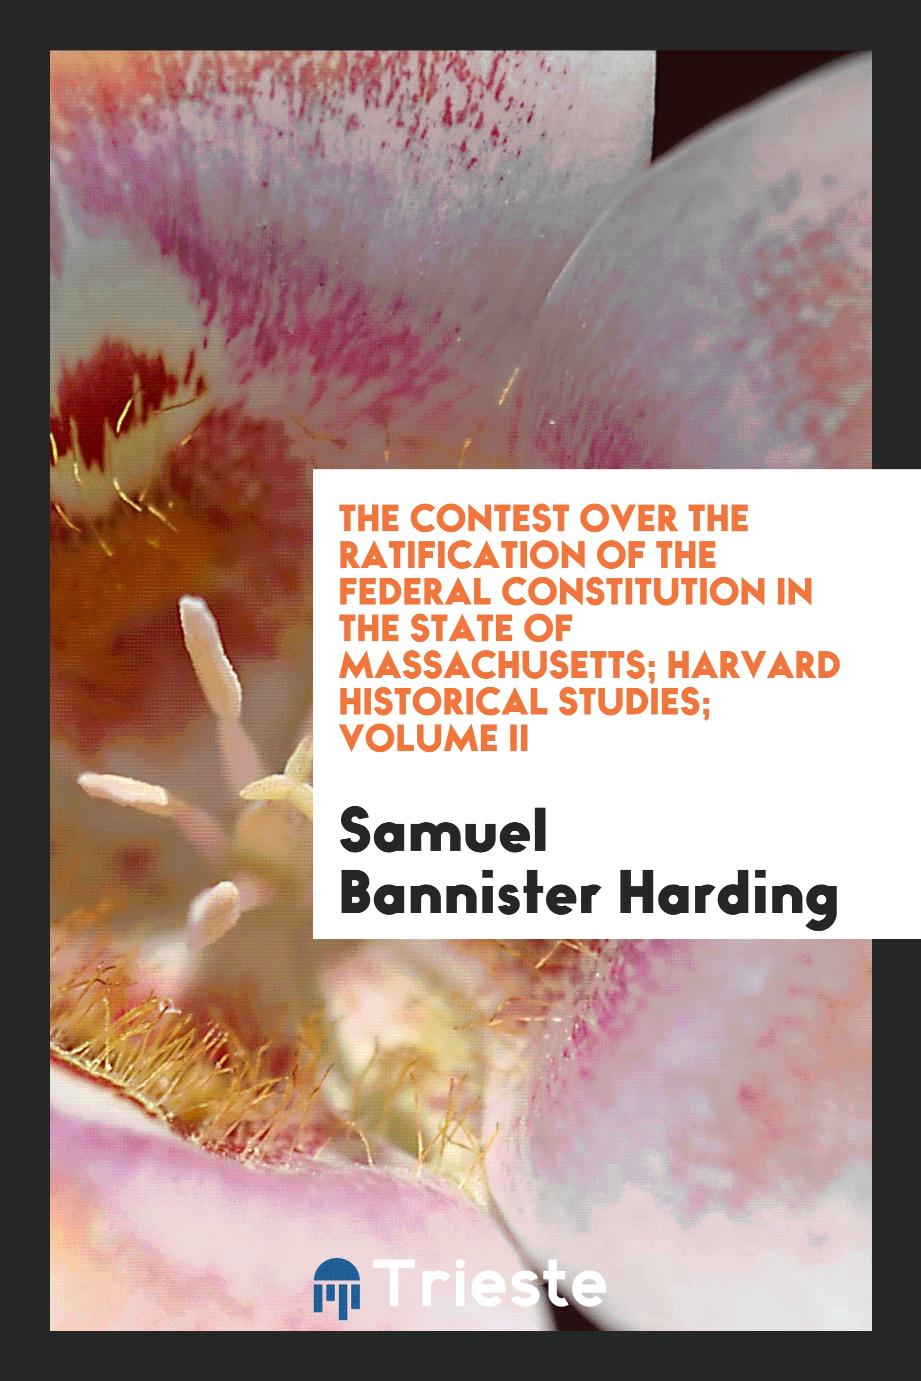 The contest over the ratification of the Federal Constitution in the state of Massachusetts; Harvard historical studies; Volume II